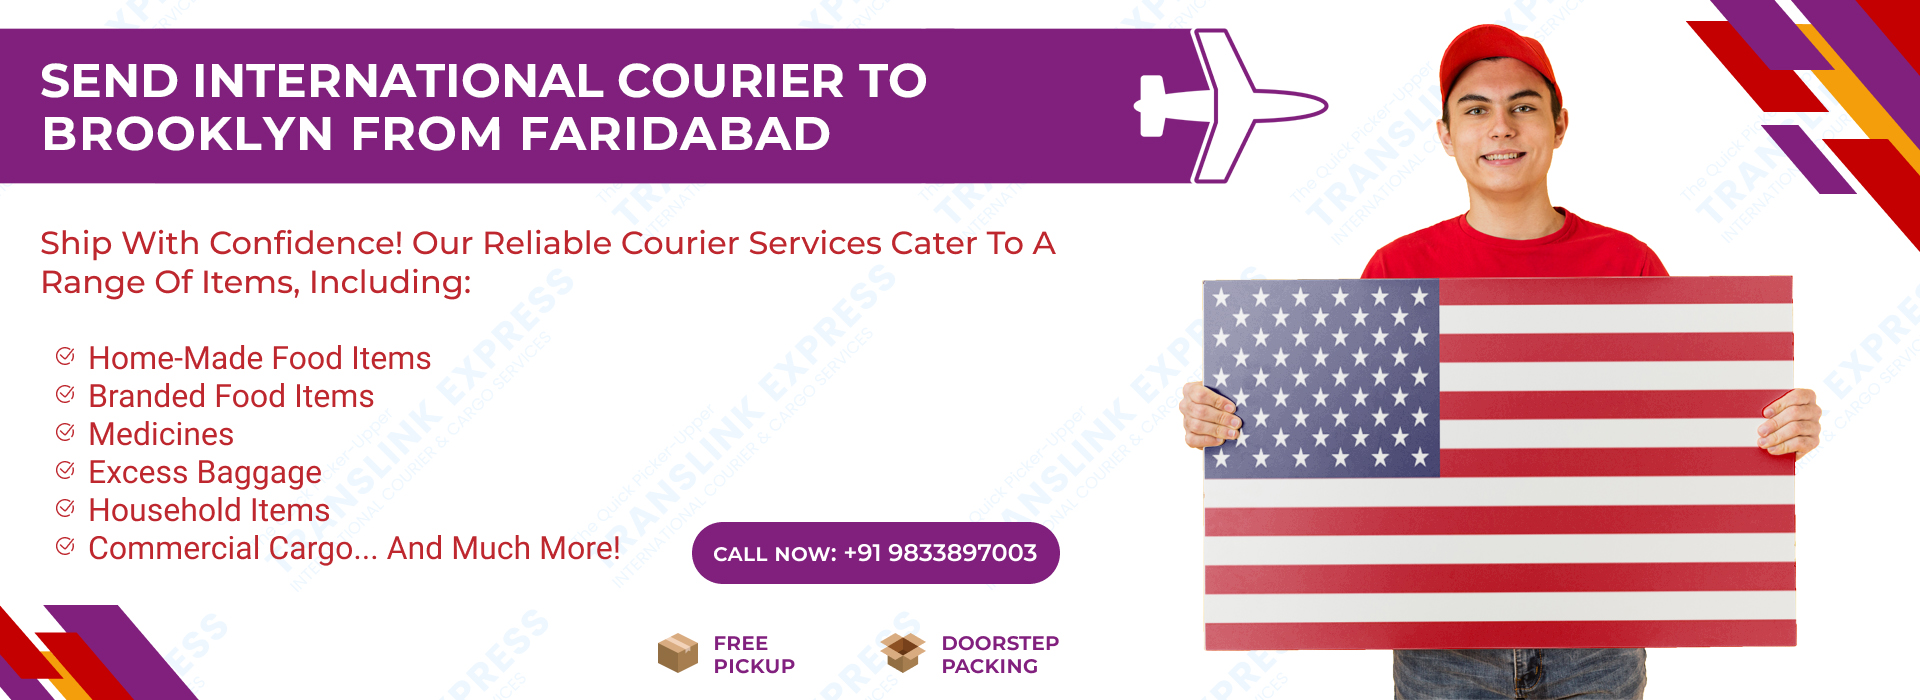 Courier to Brooklyn From Faridabad